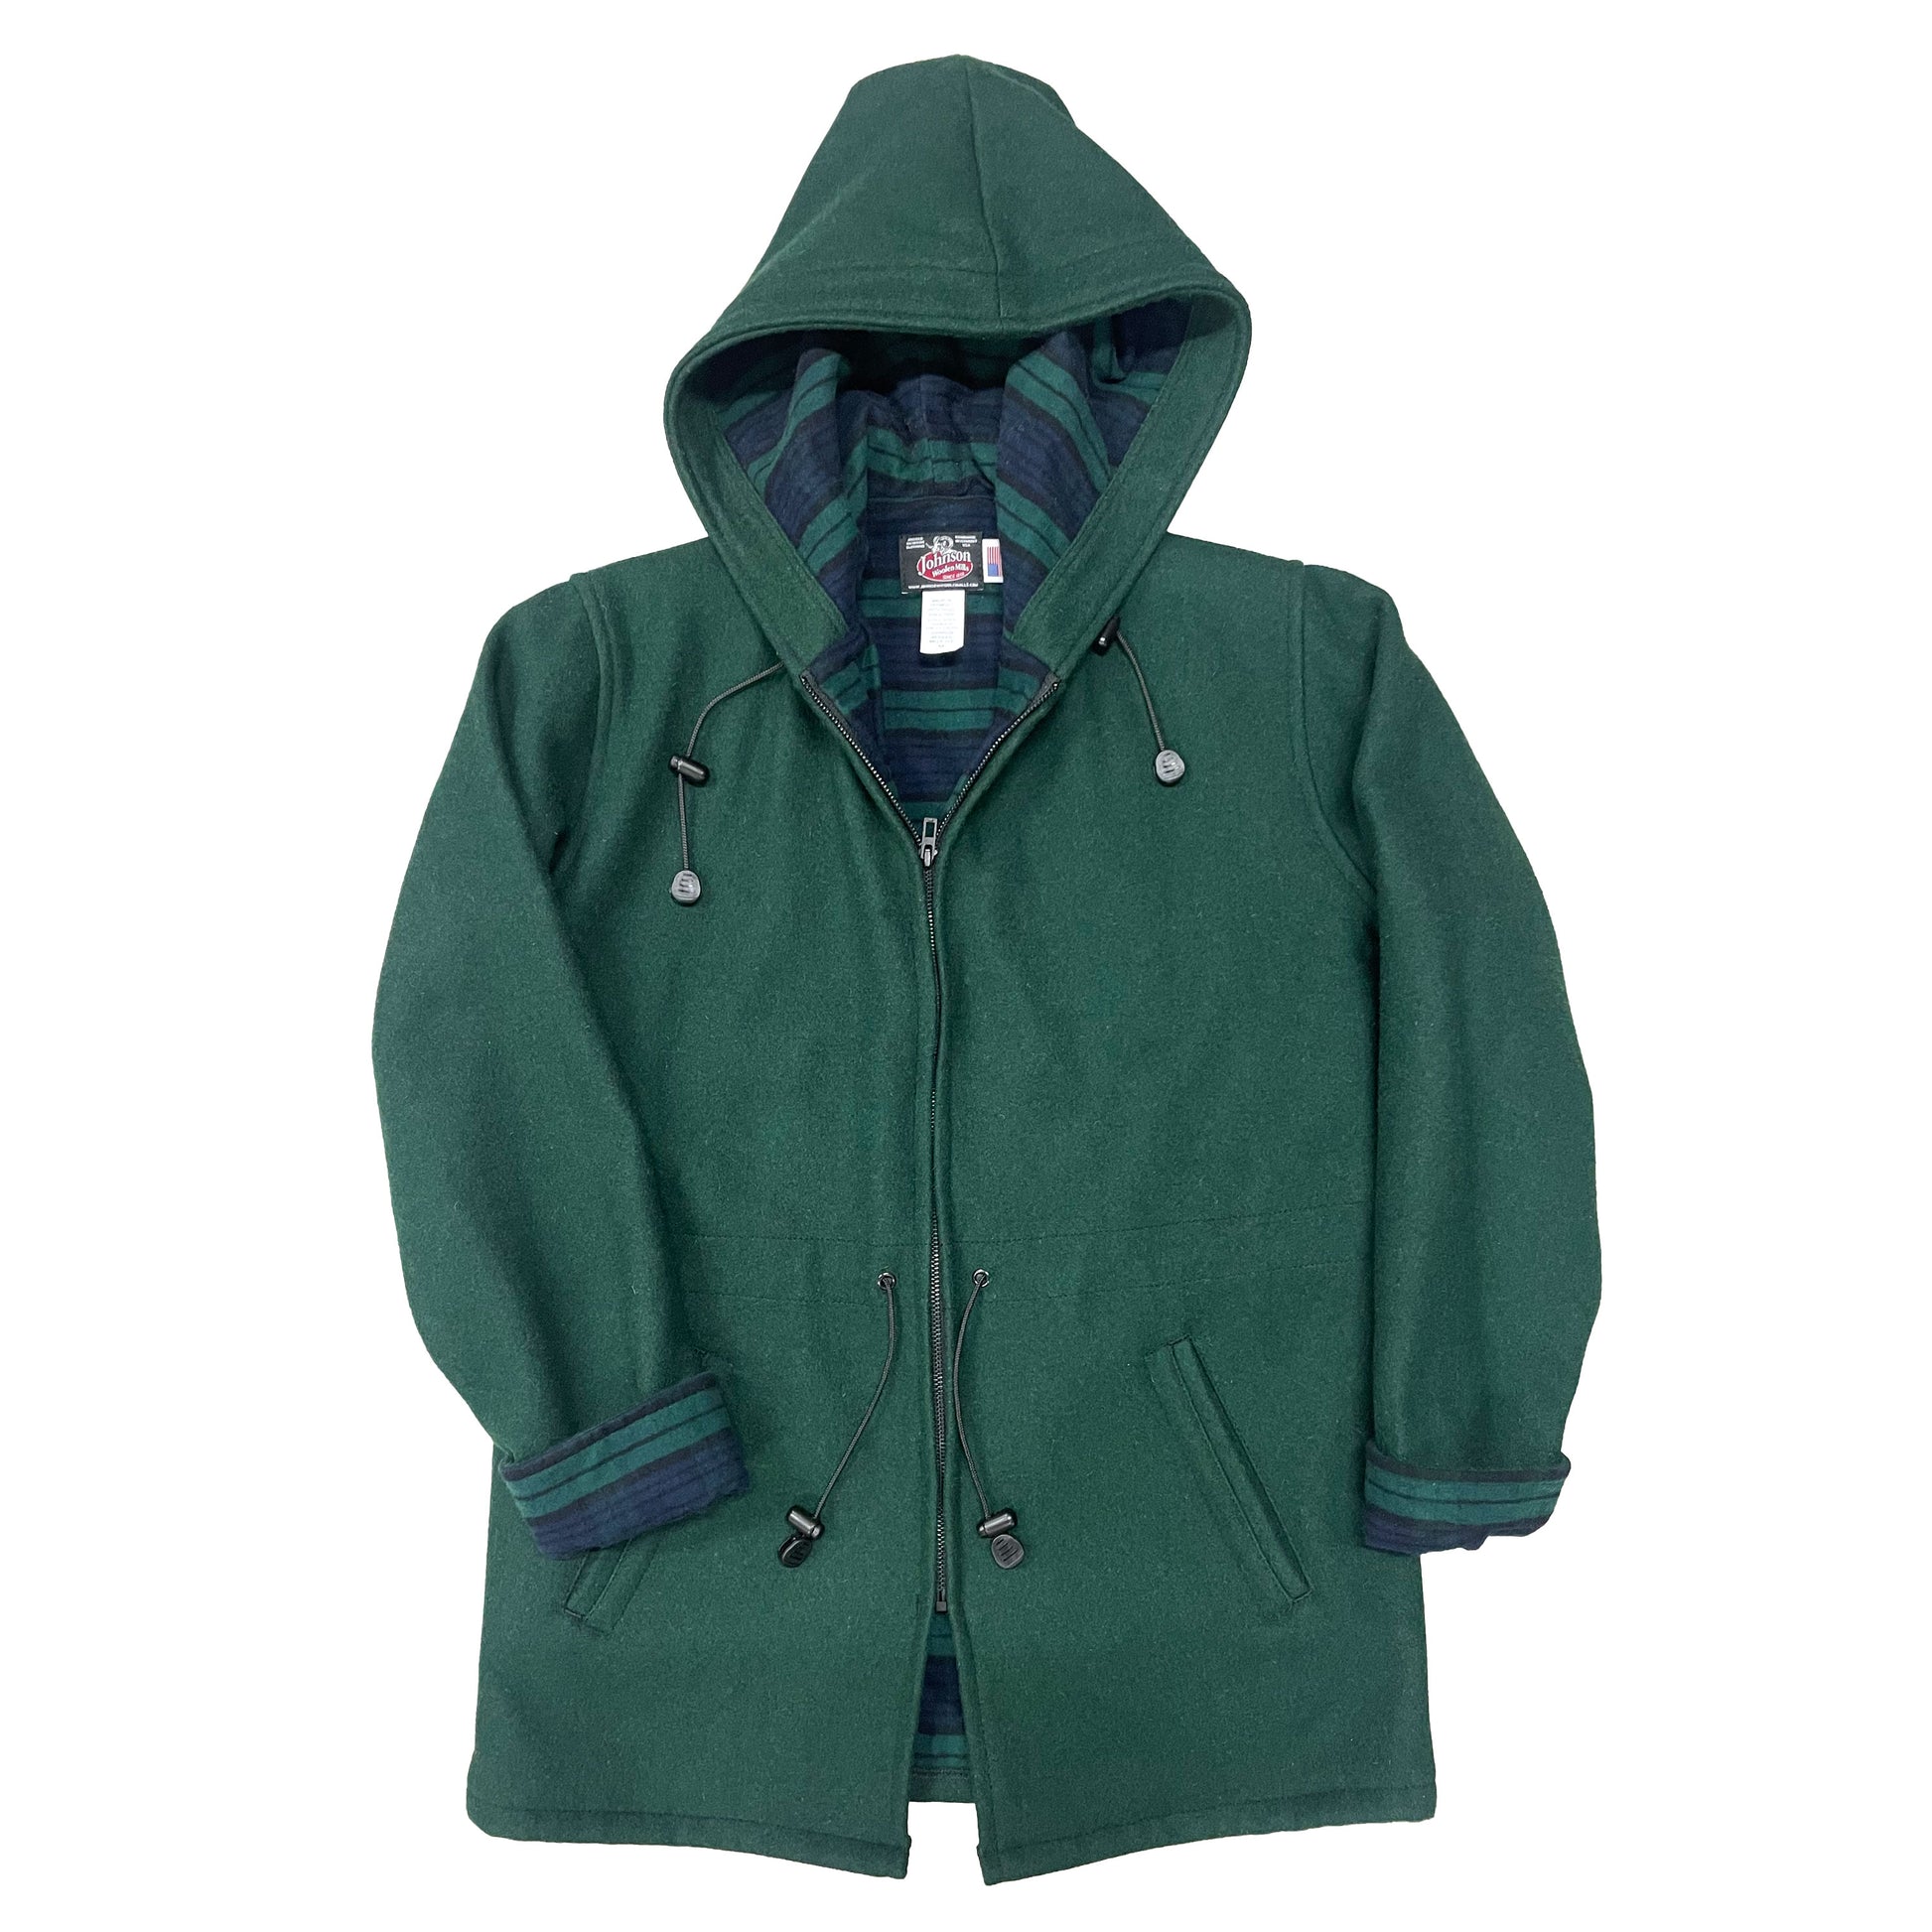 JWM Women's Anorack Jacket, Flannel lining, two pockets, lined hood with front zipper shown in Spruce Green